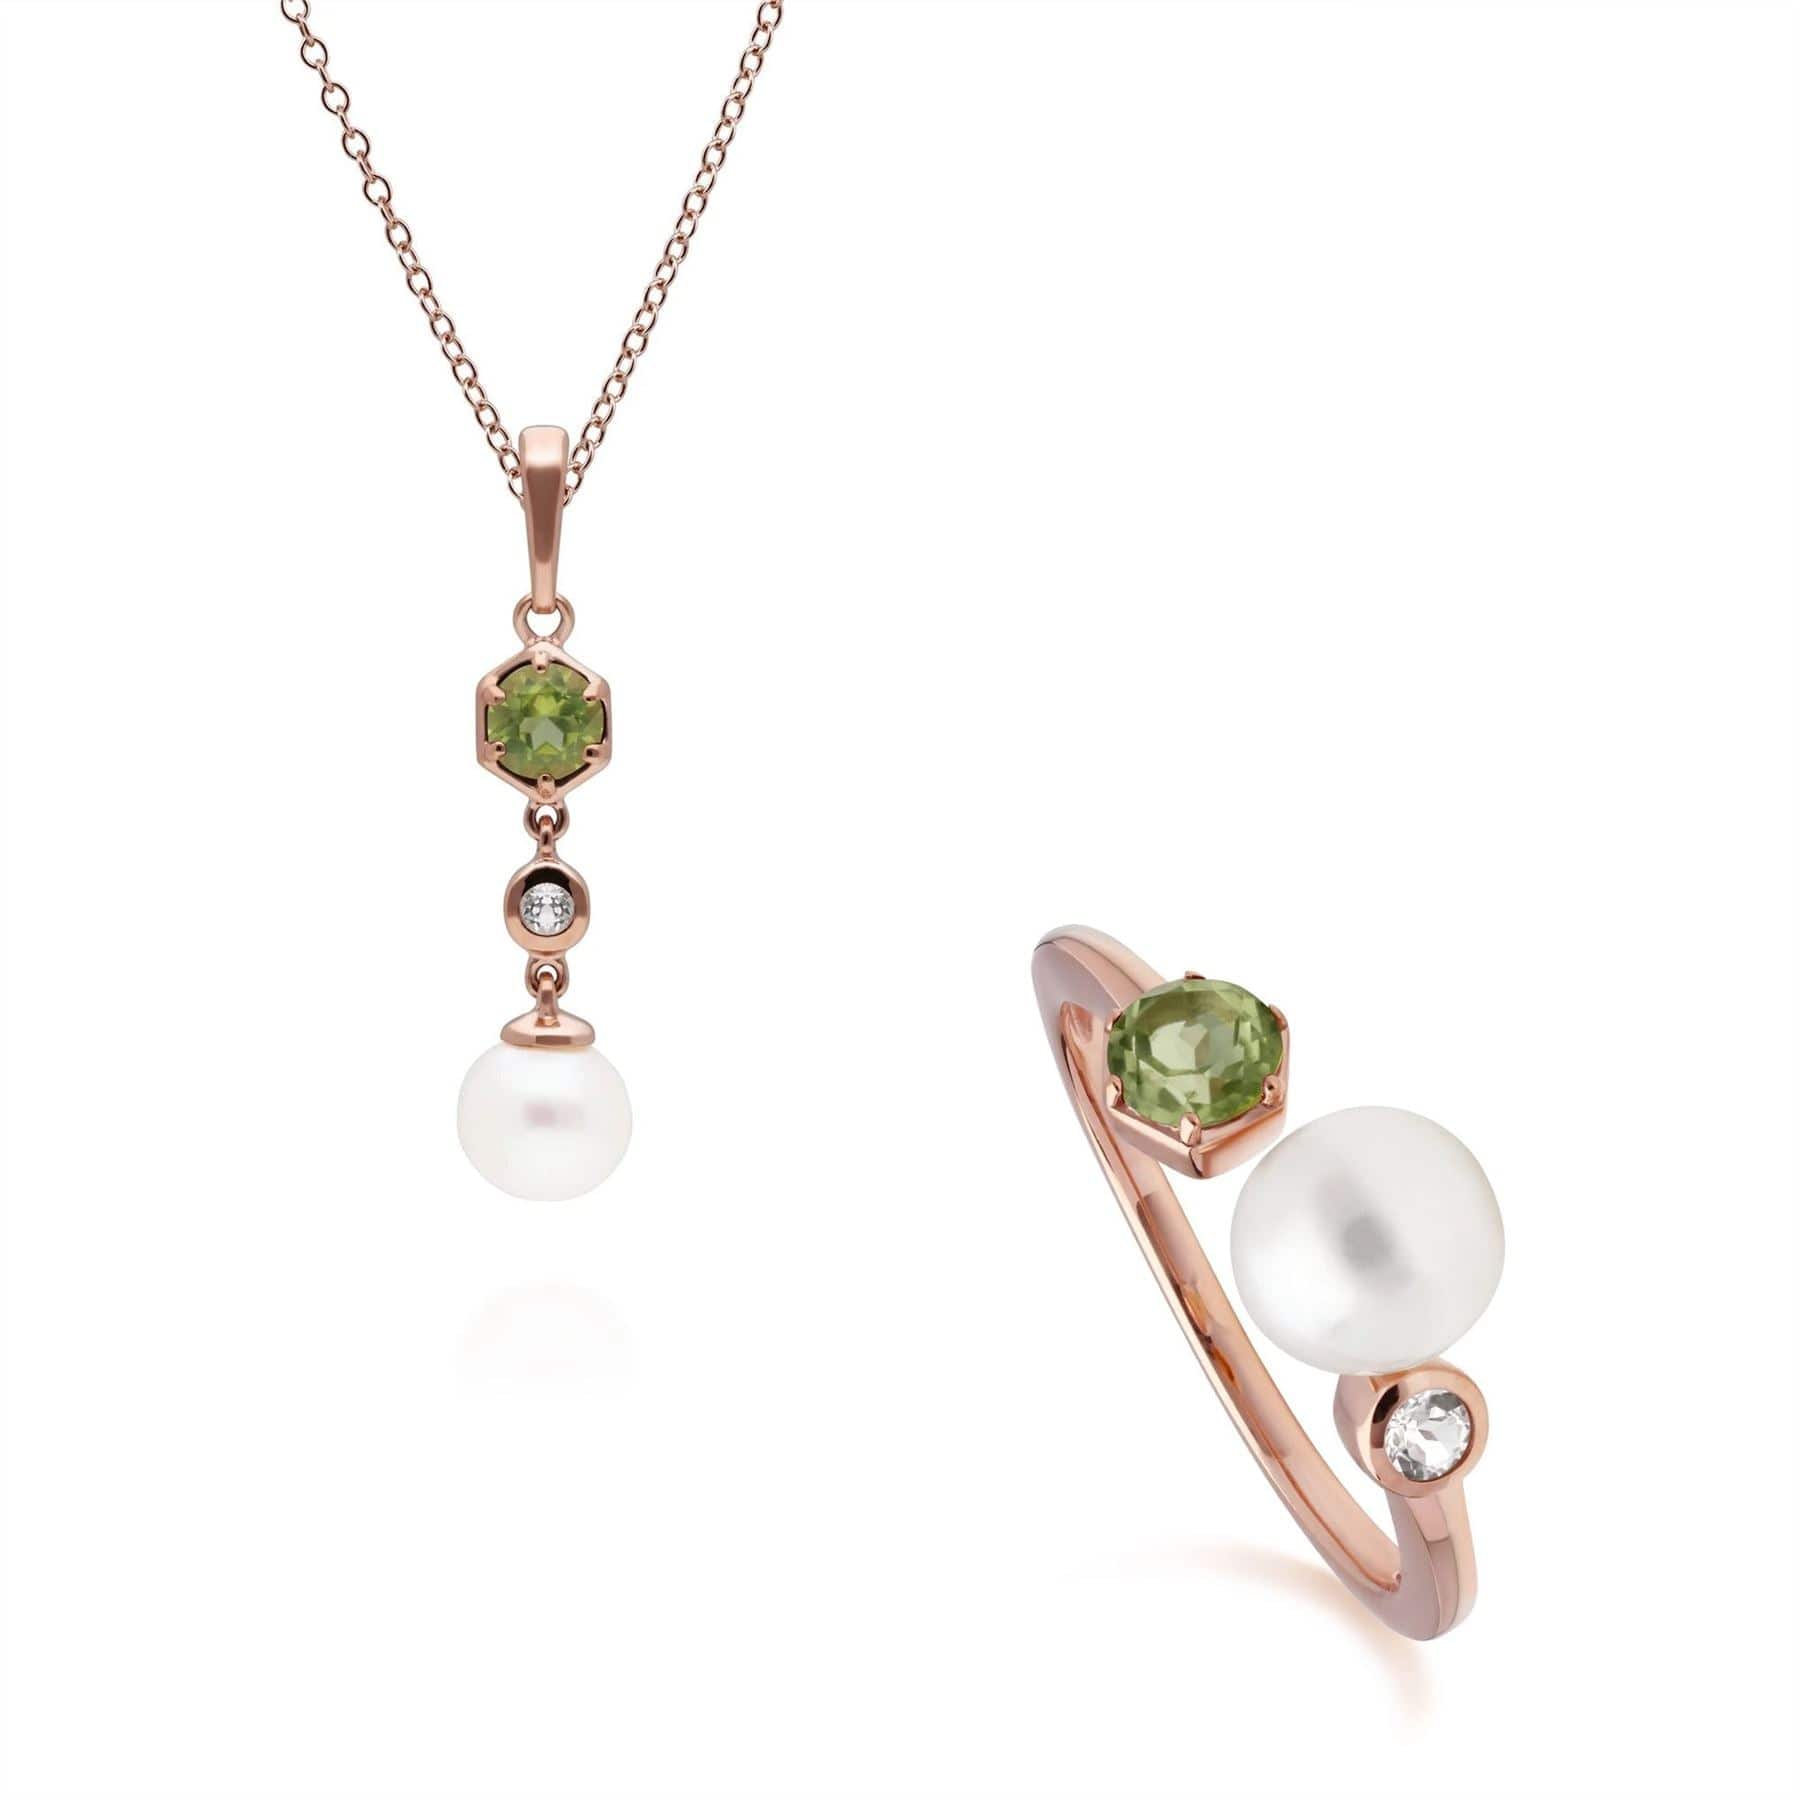 270P030306925-270R058806925 Modern Pearl, Peridot & Topaz Pendant & Ring Set in Rose Gold Plated Silver 1